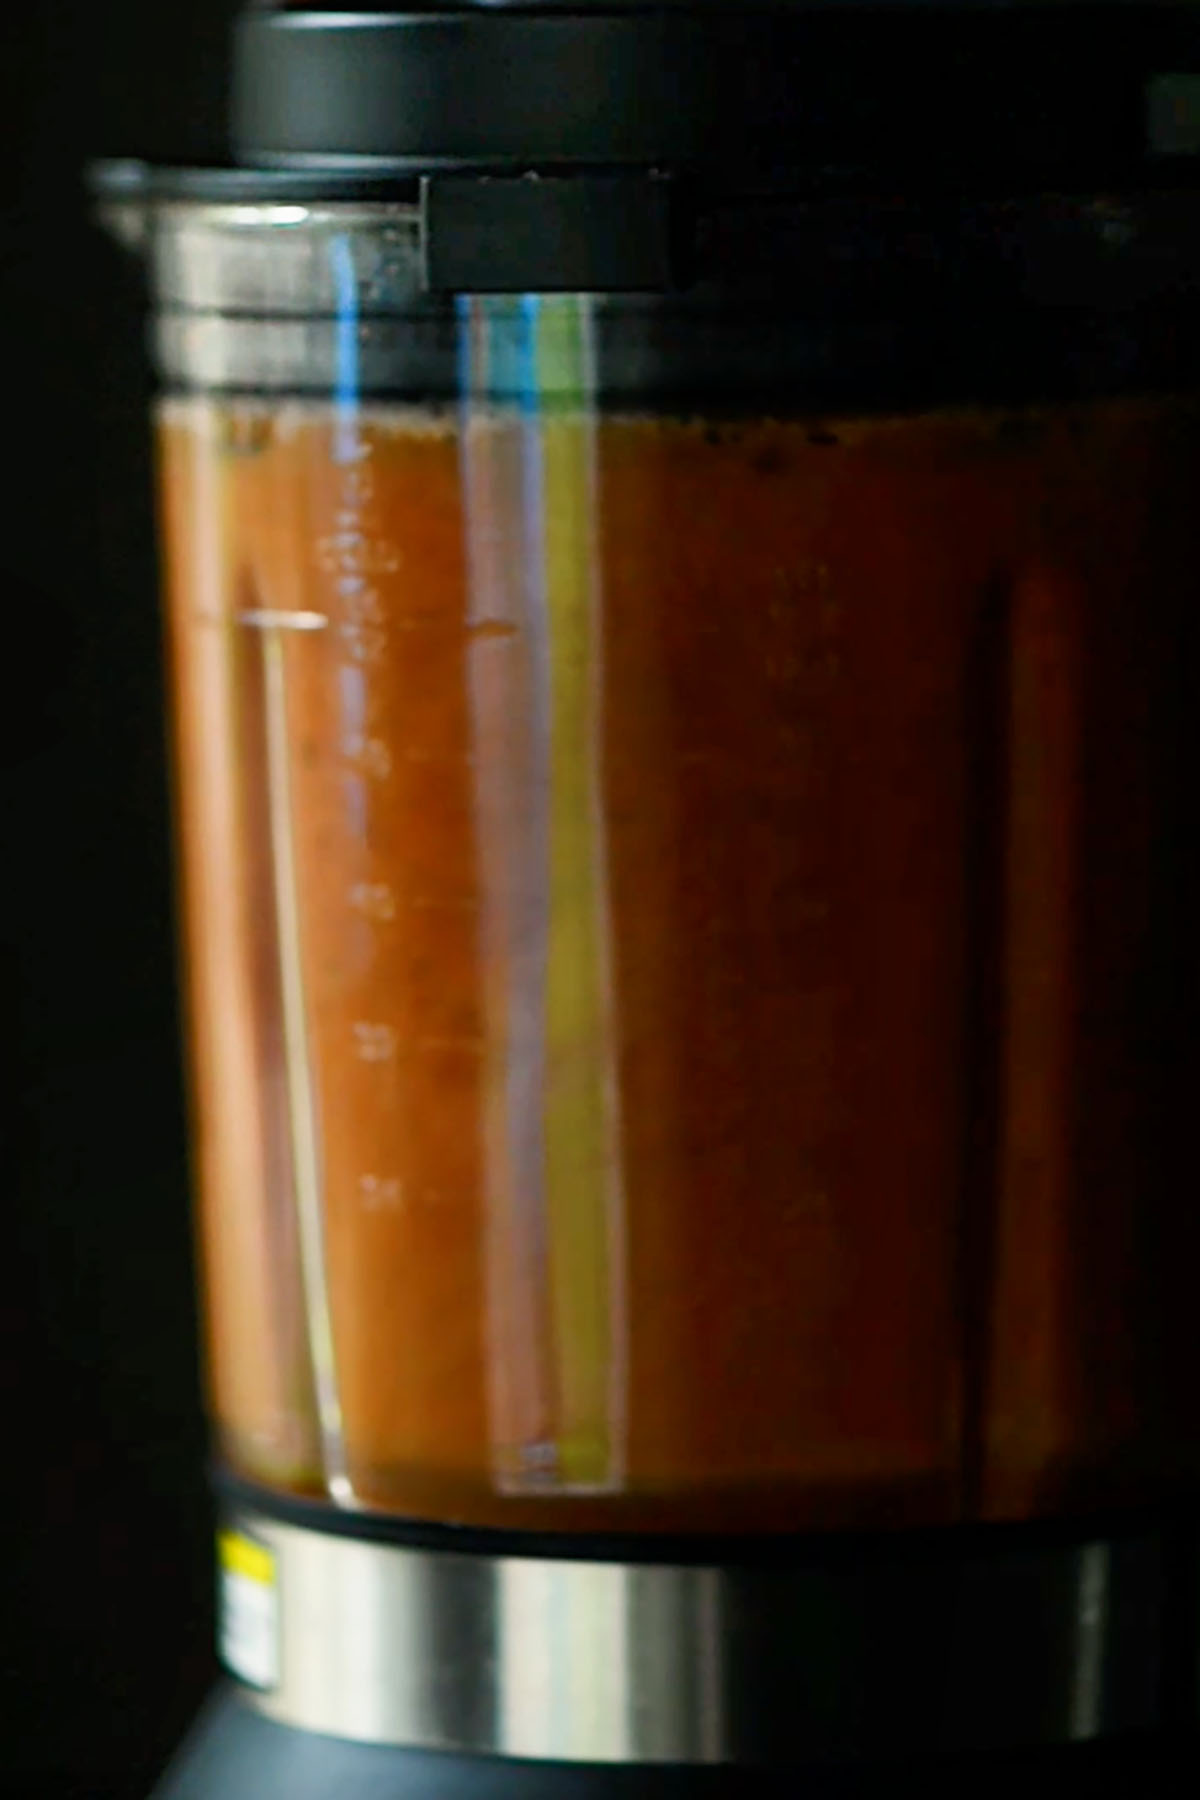 Tomato soup base in a cooking blender.